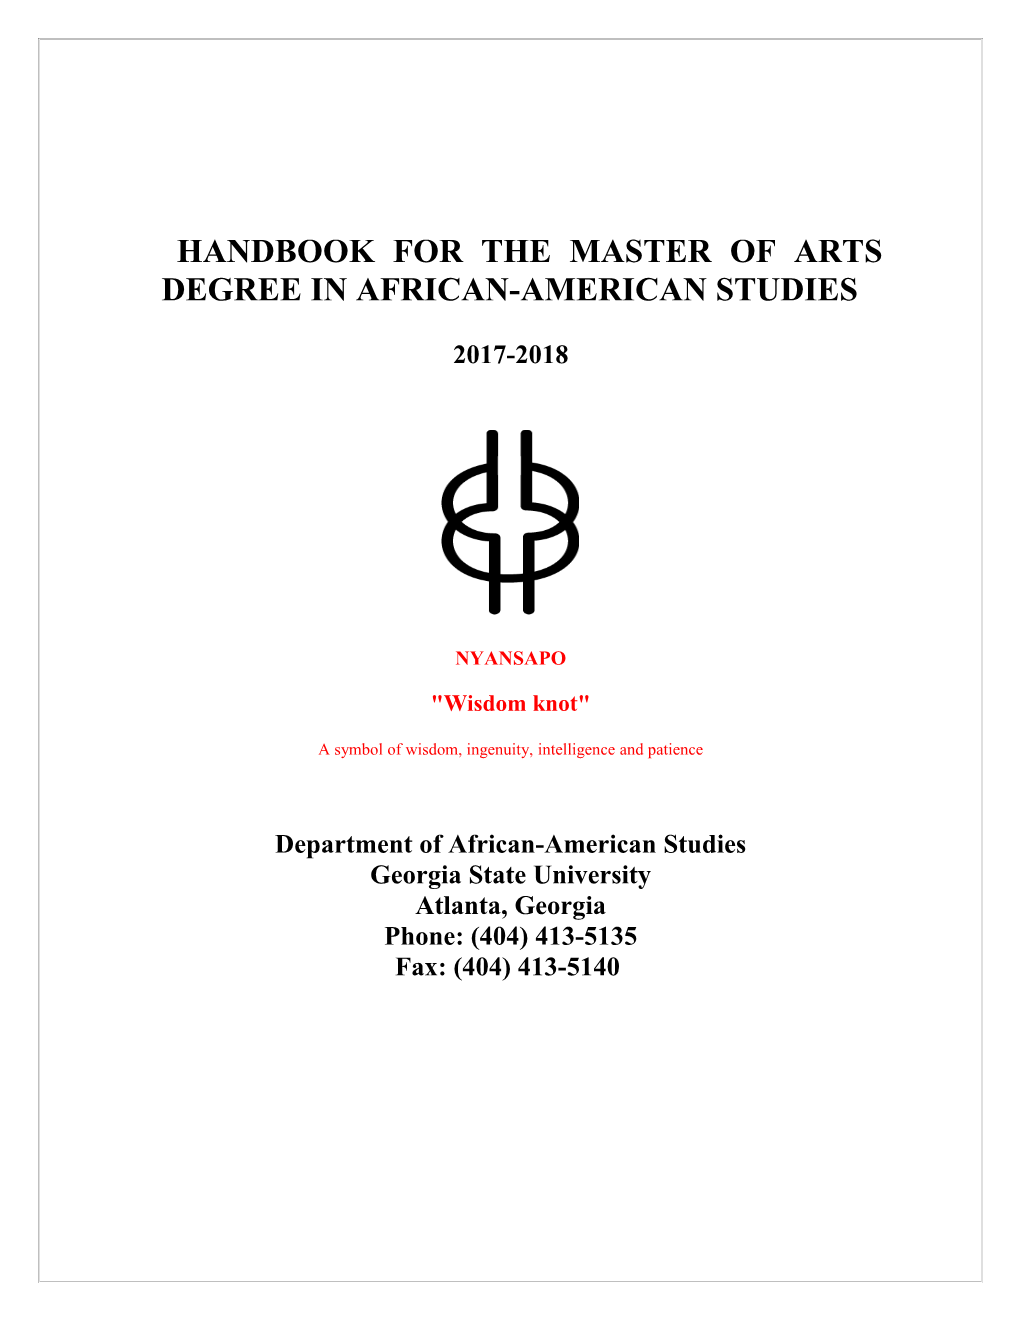 Handbook for the Master of Arts Degree in African-American Studies